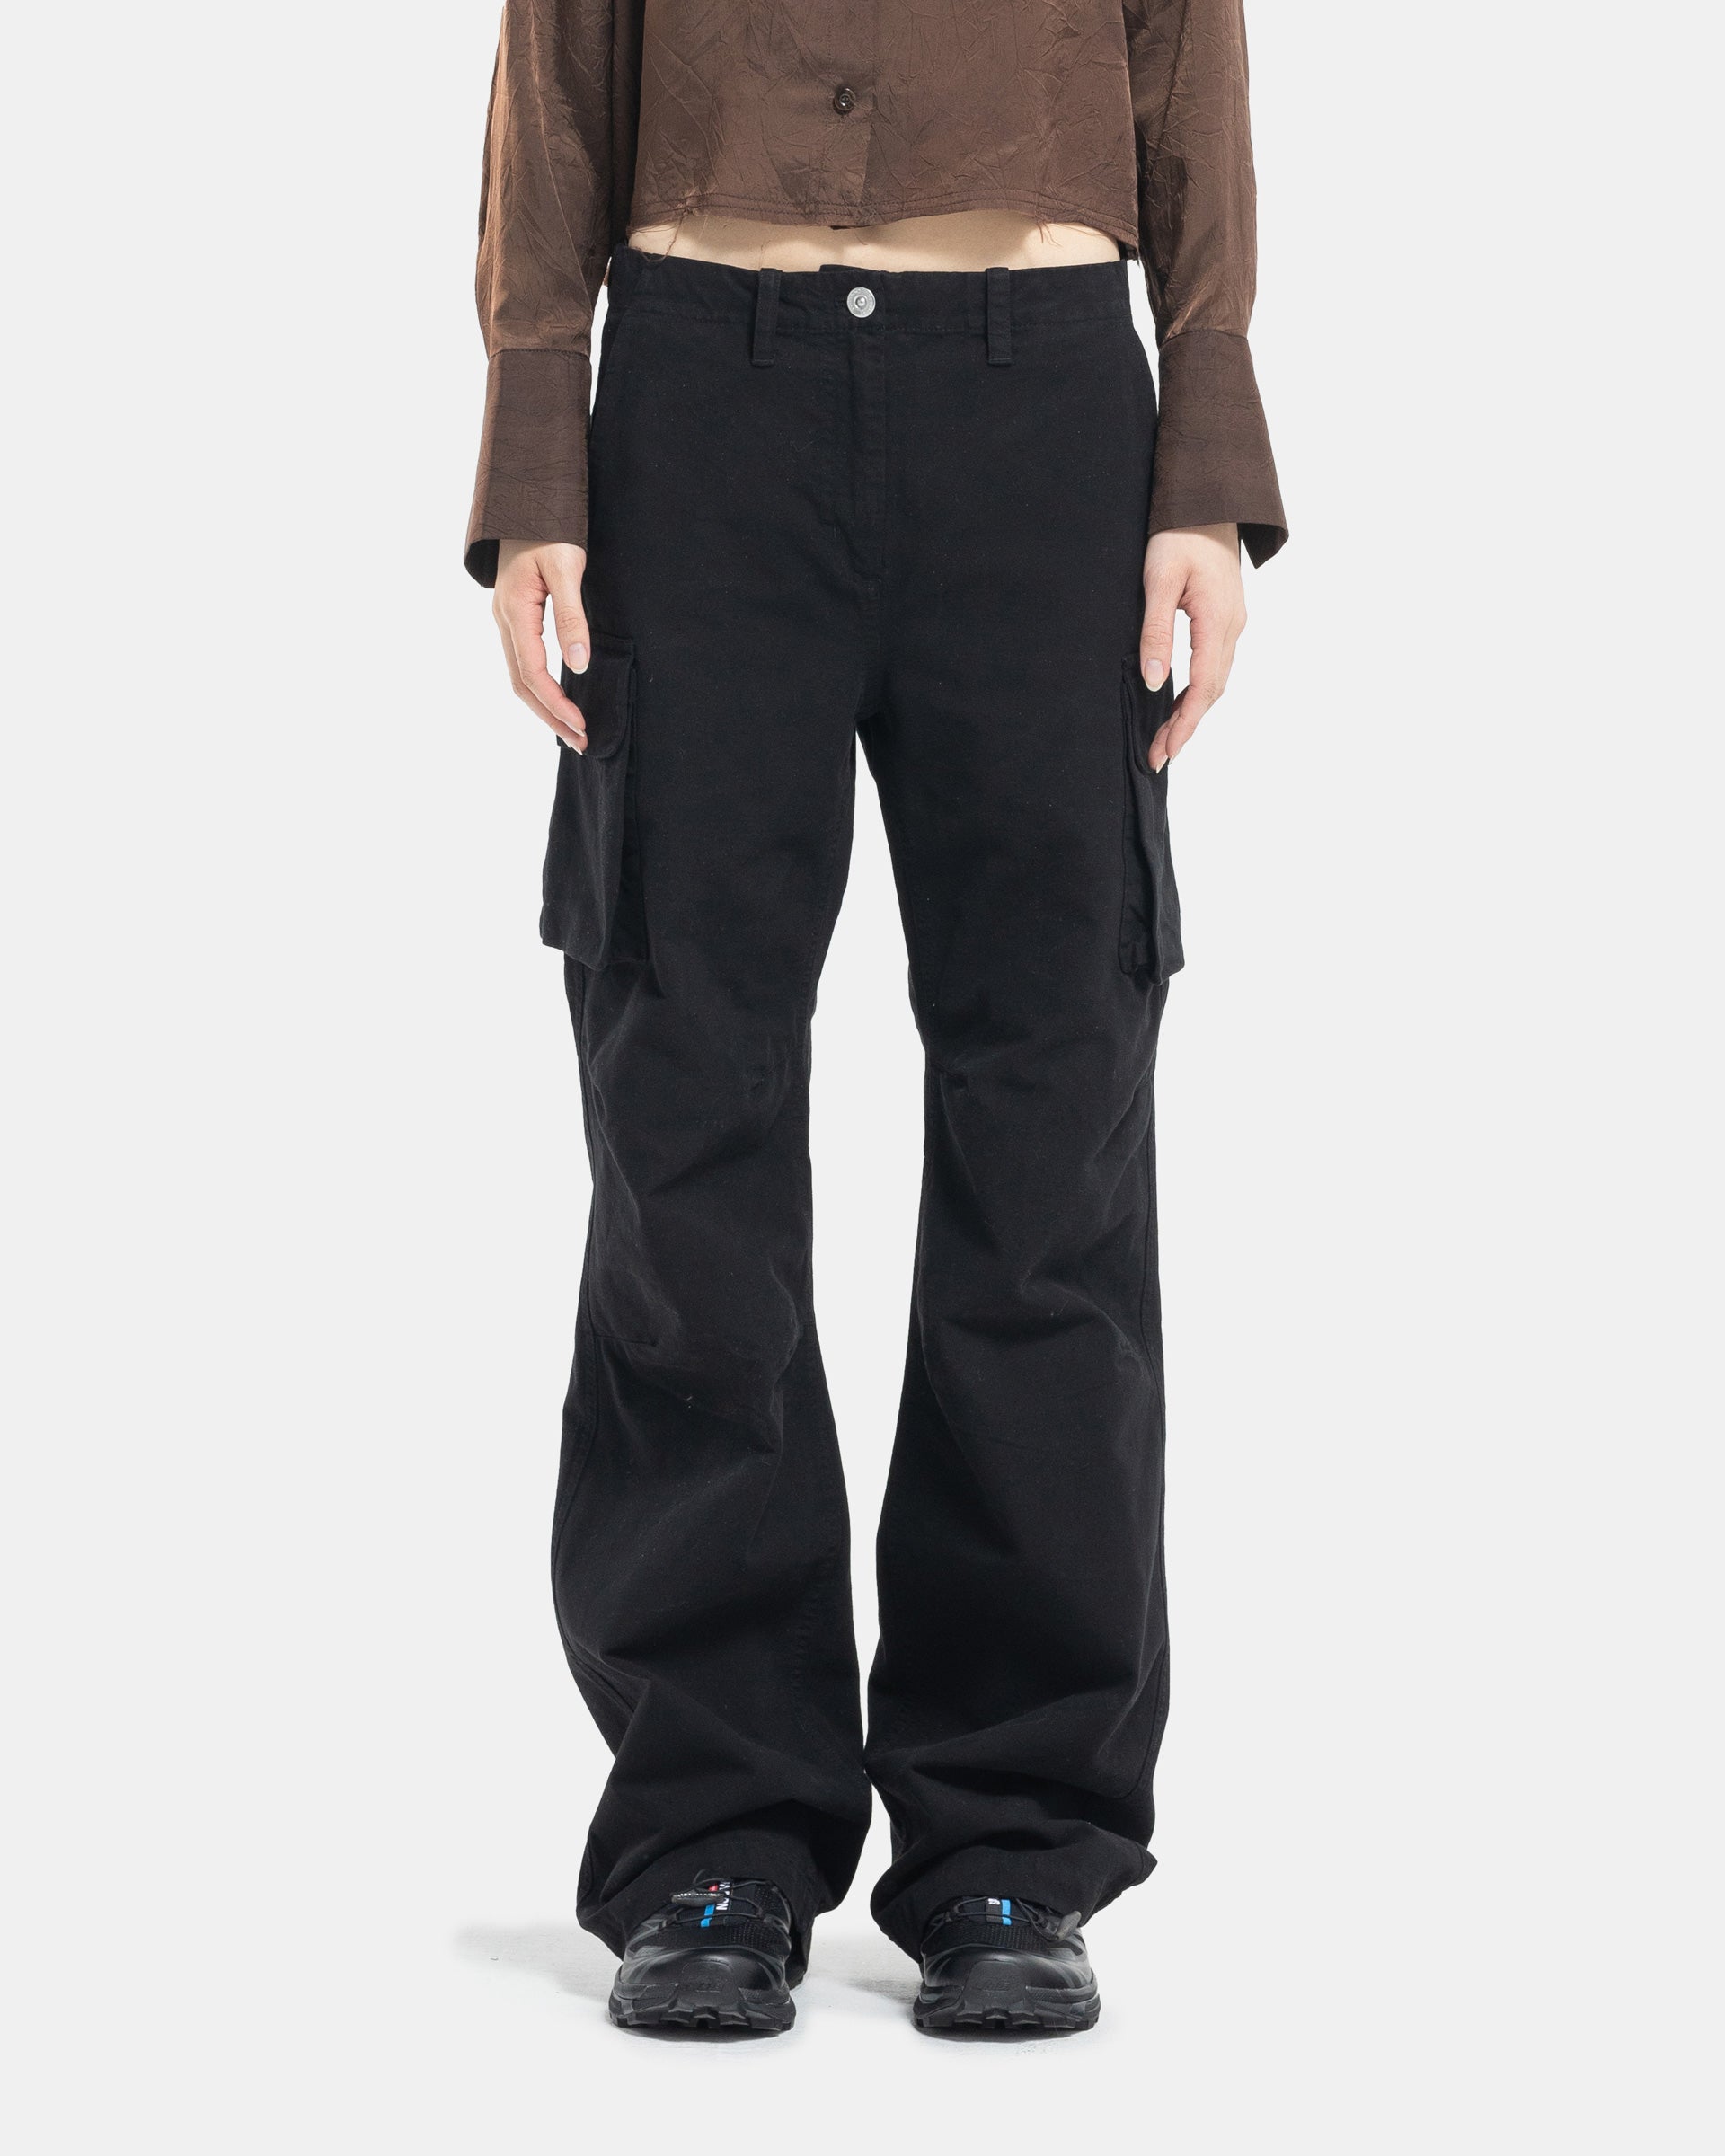 Black Cargo Pants from Our Legacy on white background